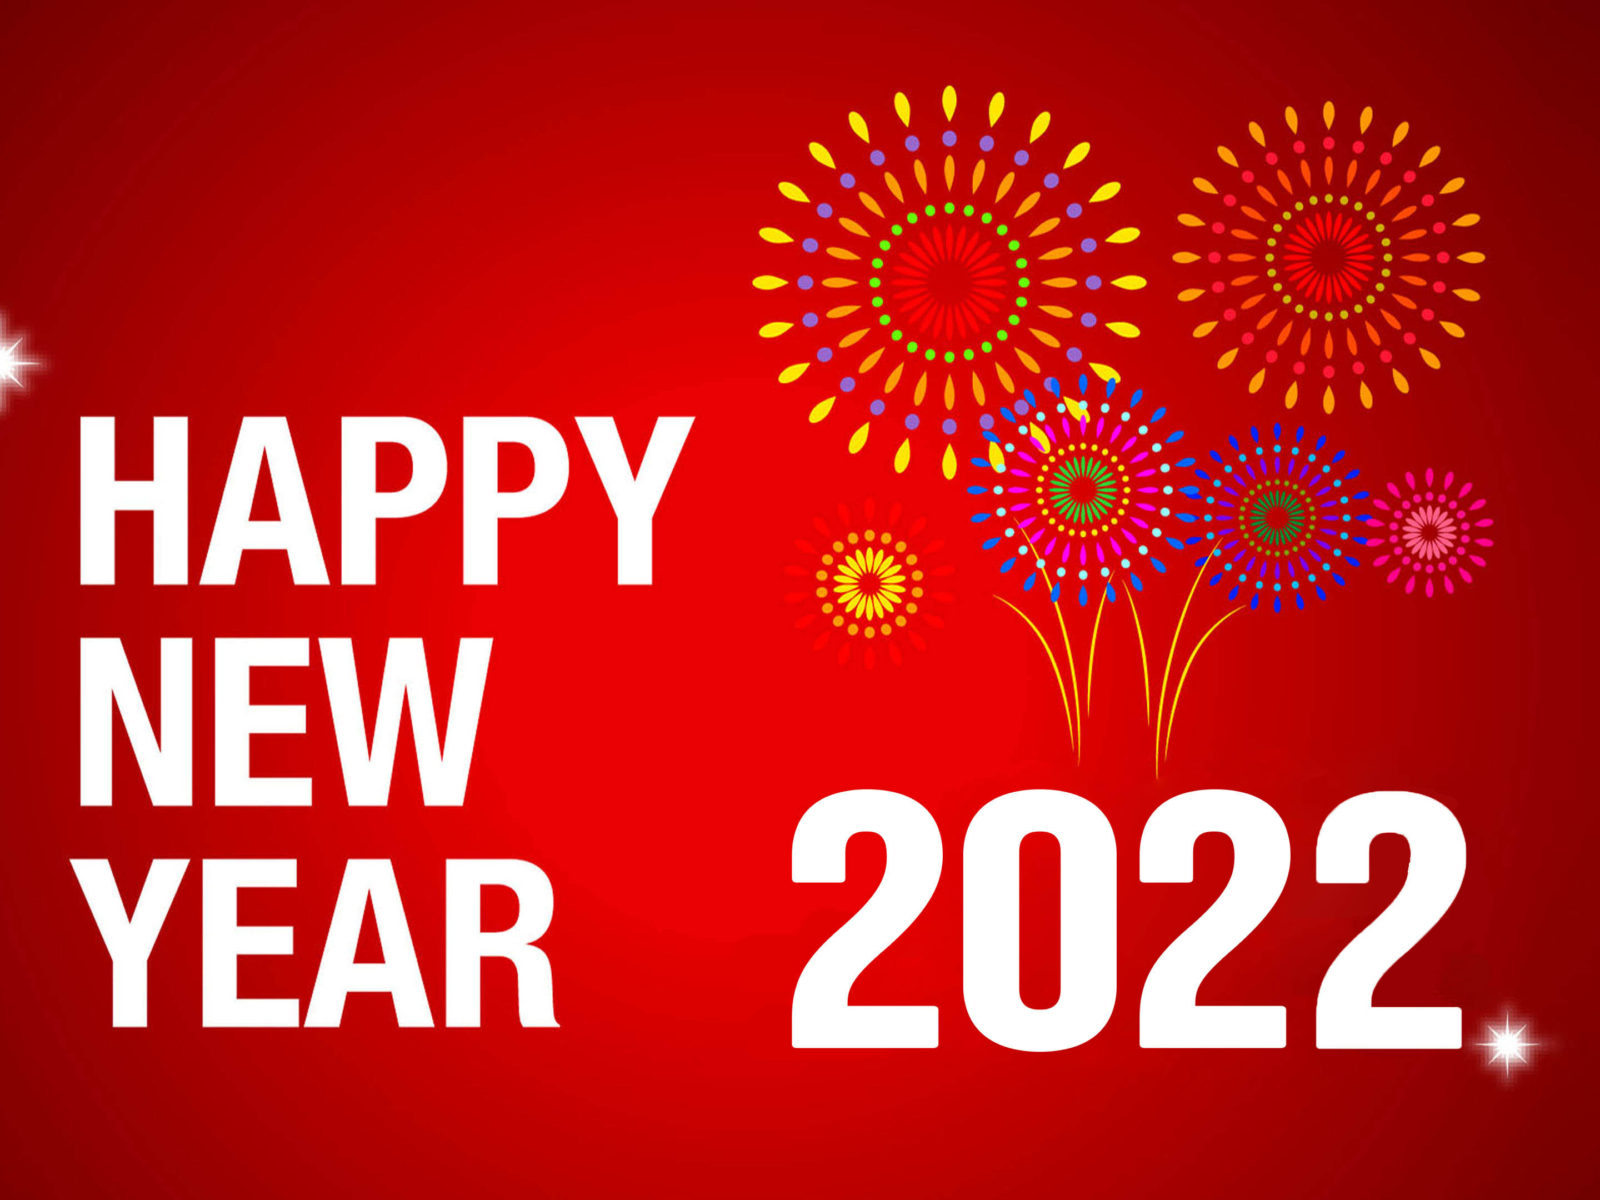 Happy New 2022 Year New Year's Celebration New Year's Greeting Card Image Wallpaper HD 3840x2160, Wallpaper13.com